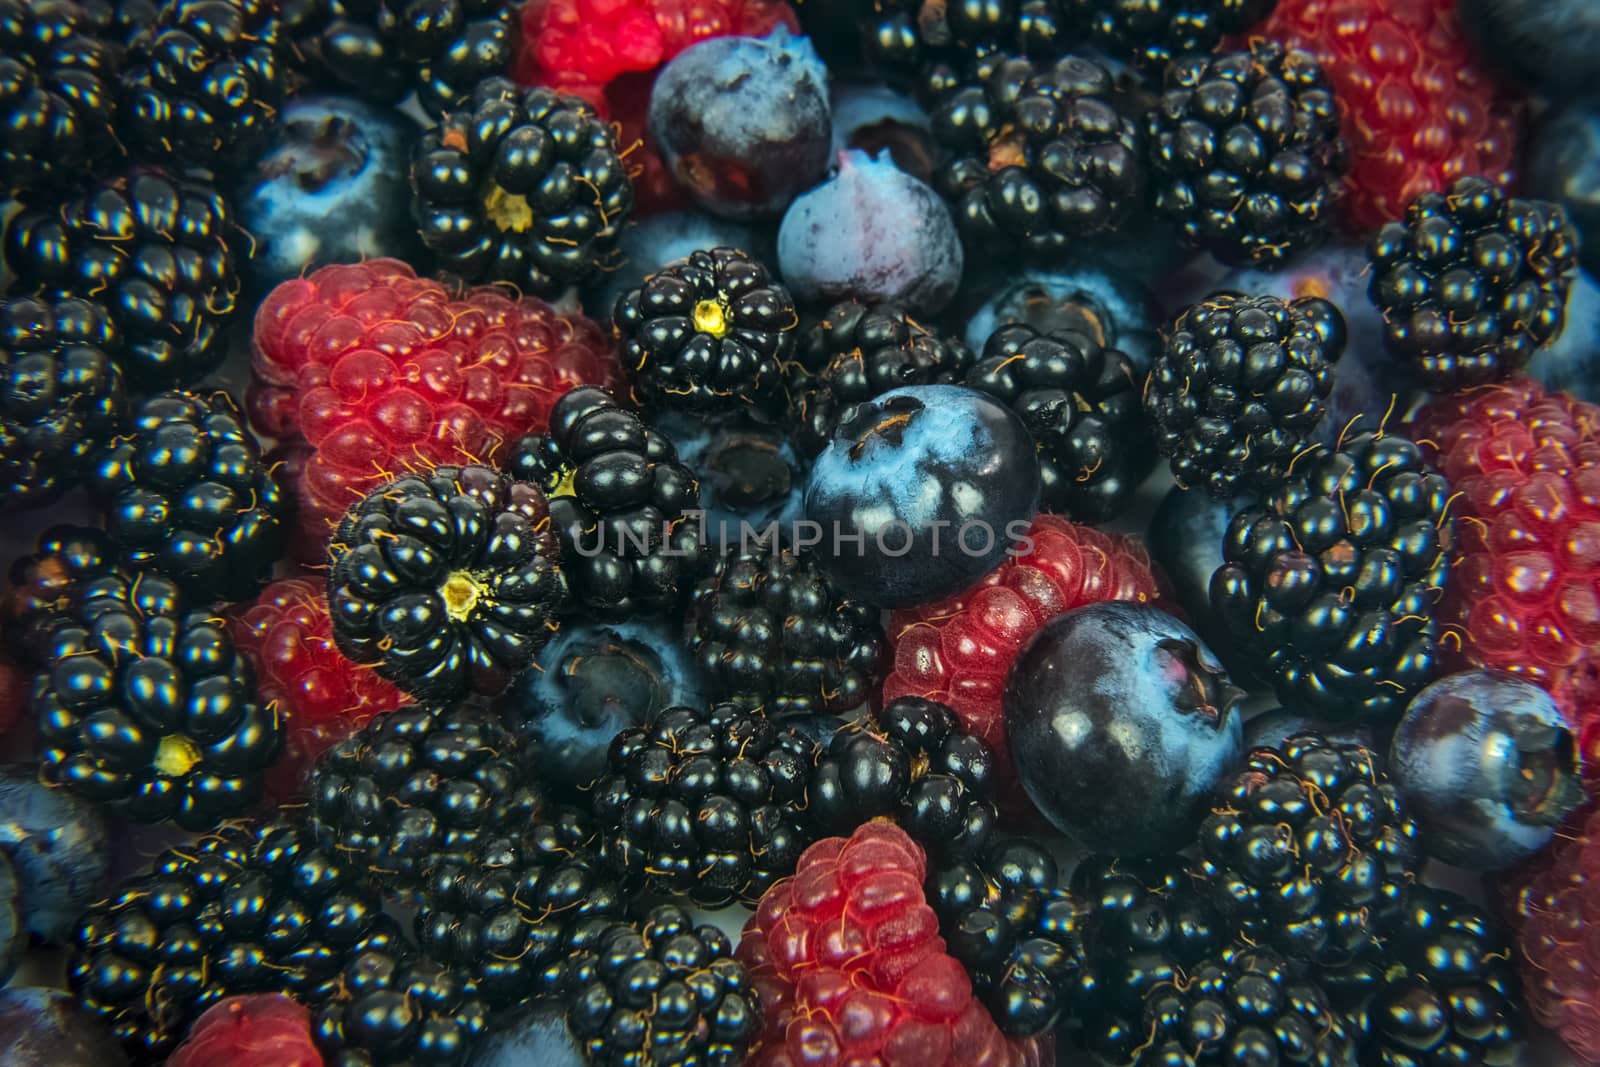 Background of many fresh forest fruits - blackberries, raspberries and berries in close-up